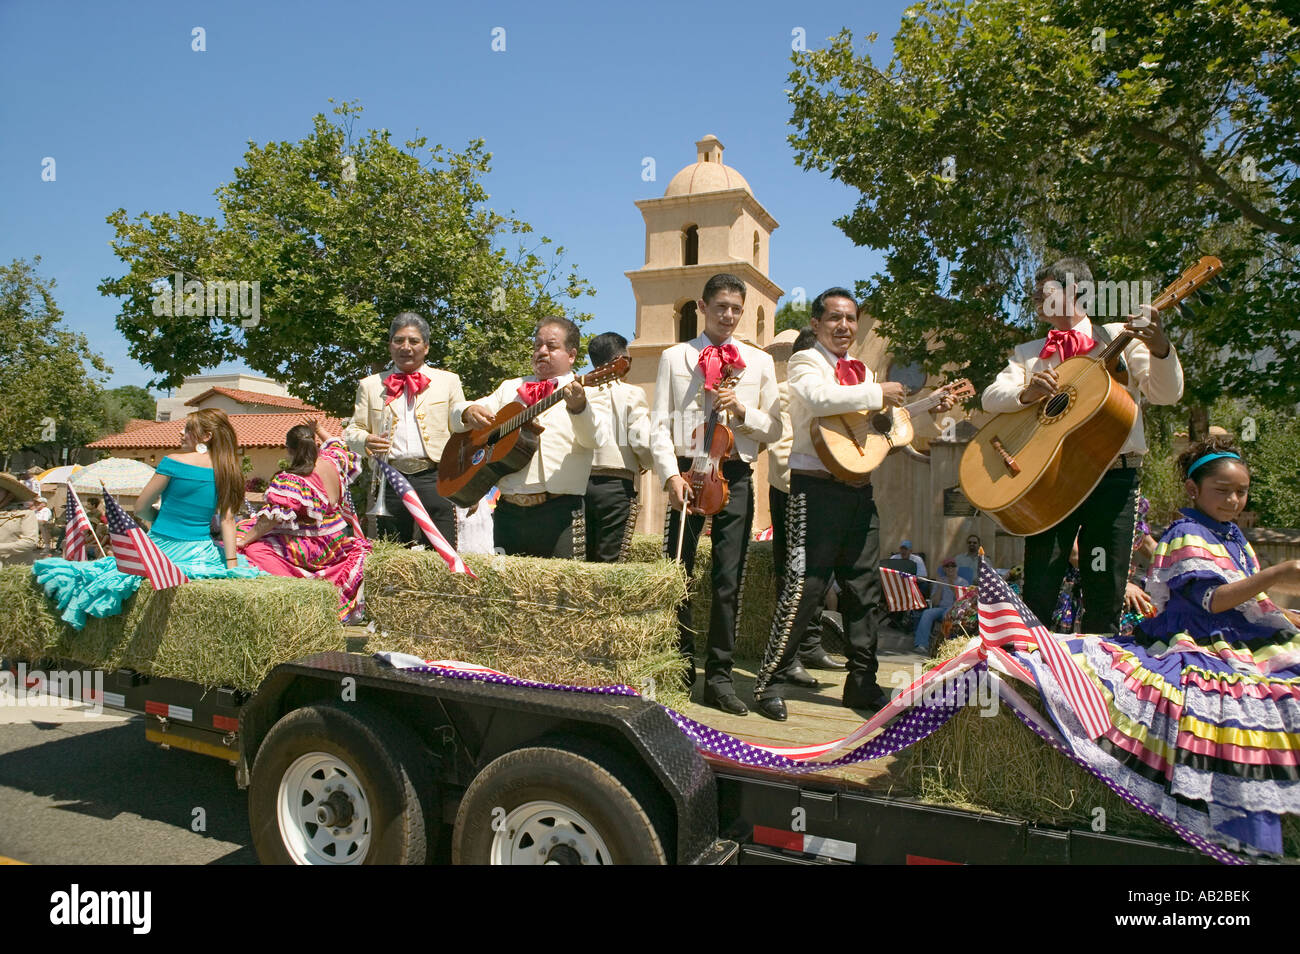 Festive float with singing Mariachis makes its way down main street during a Fourth of July parade in Ojai CA Stock Photo